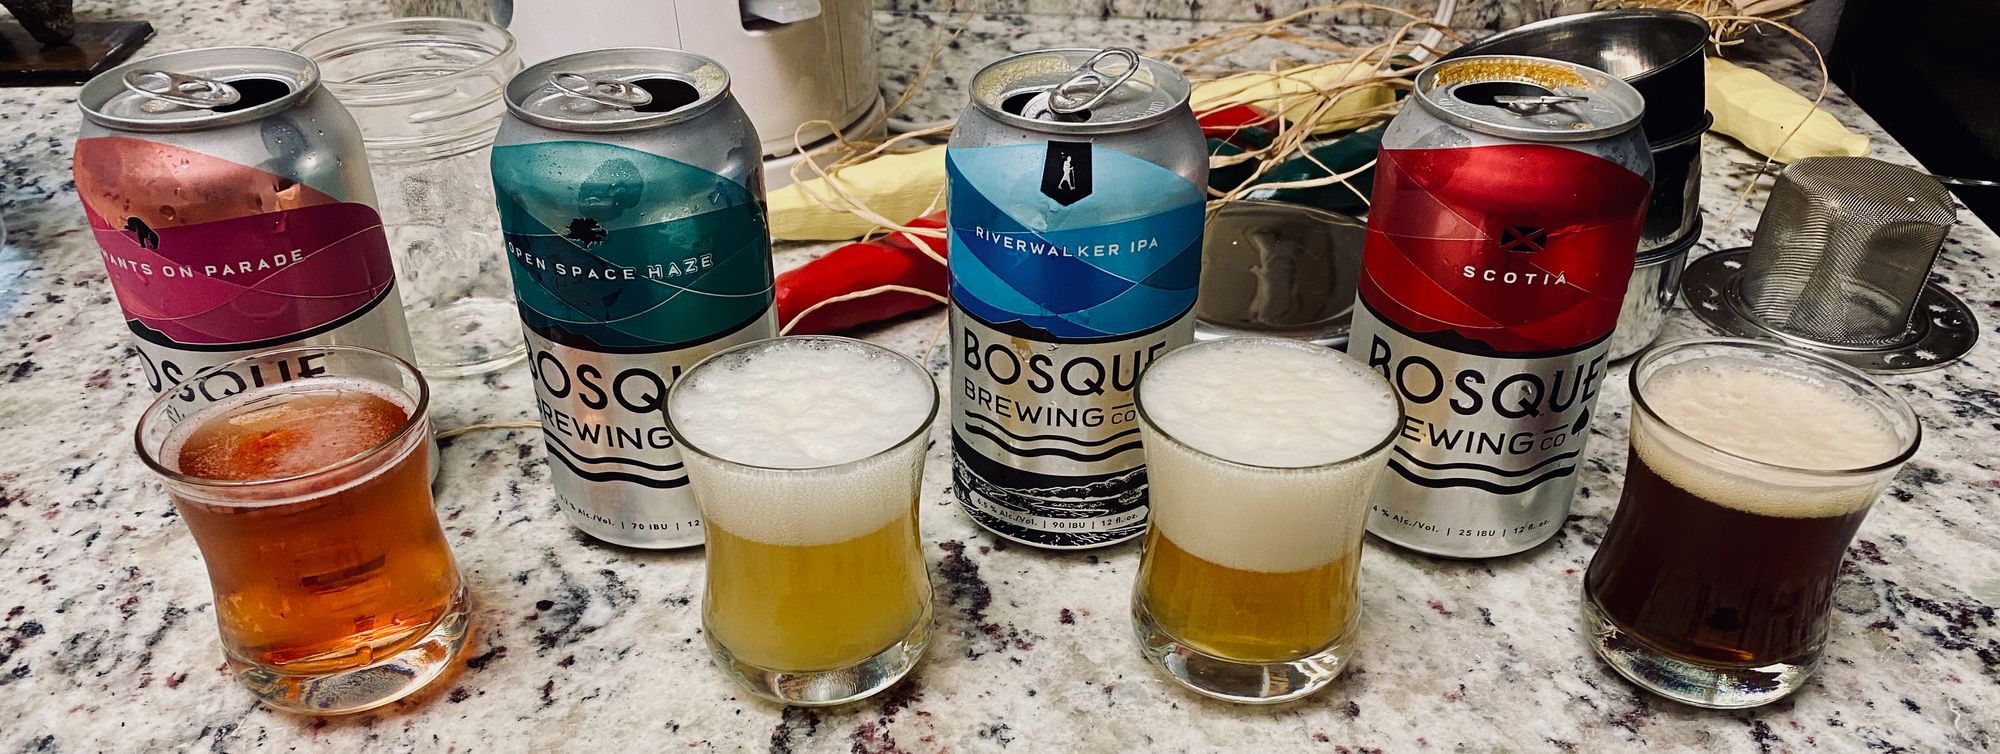 Four beer cans and poured beers from Bosque Brewing Co.